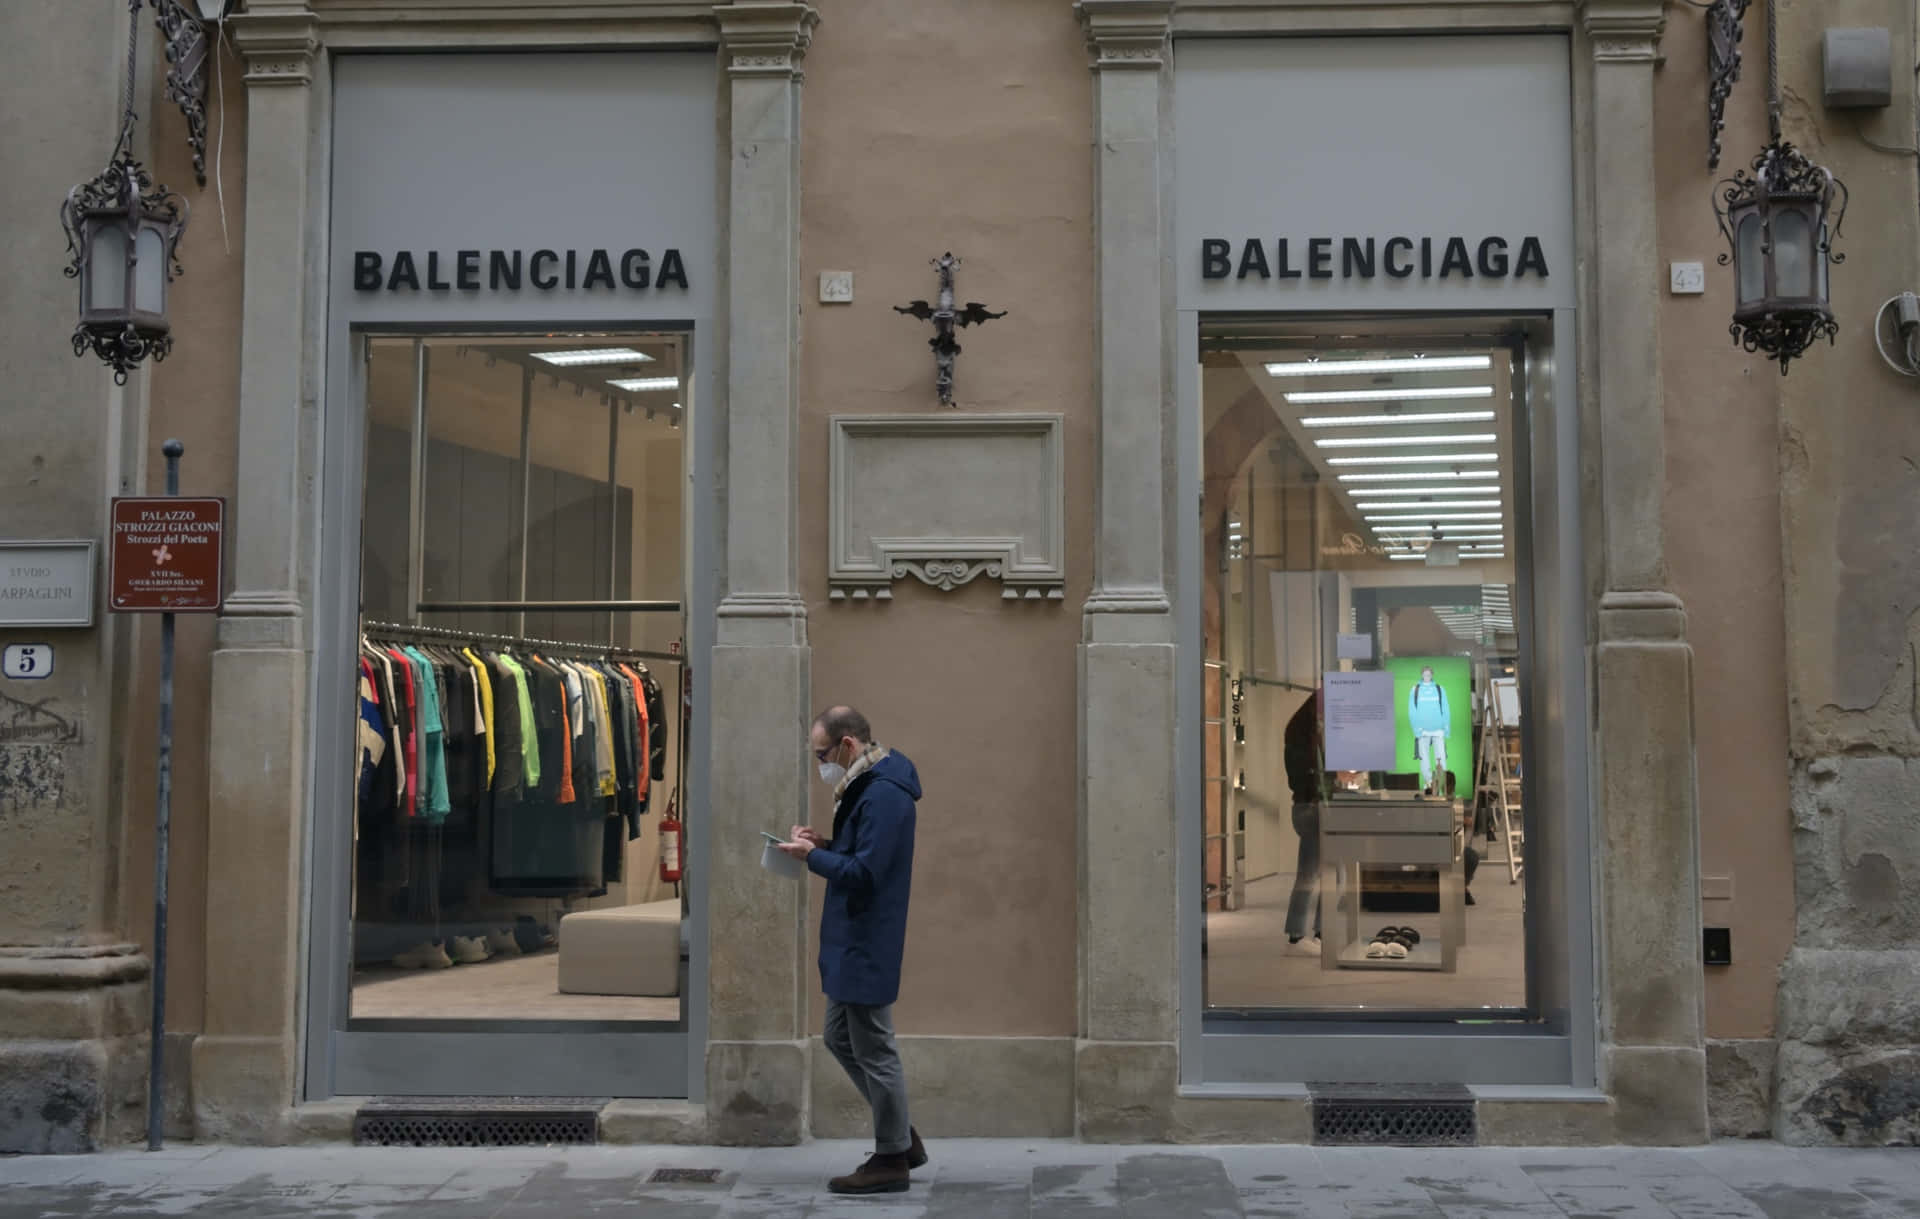 Show Them who's the 'King of The Runway' with Balenciaga